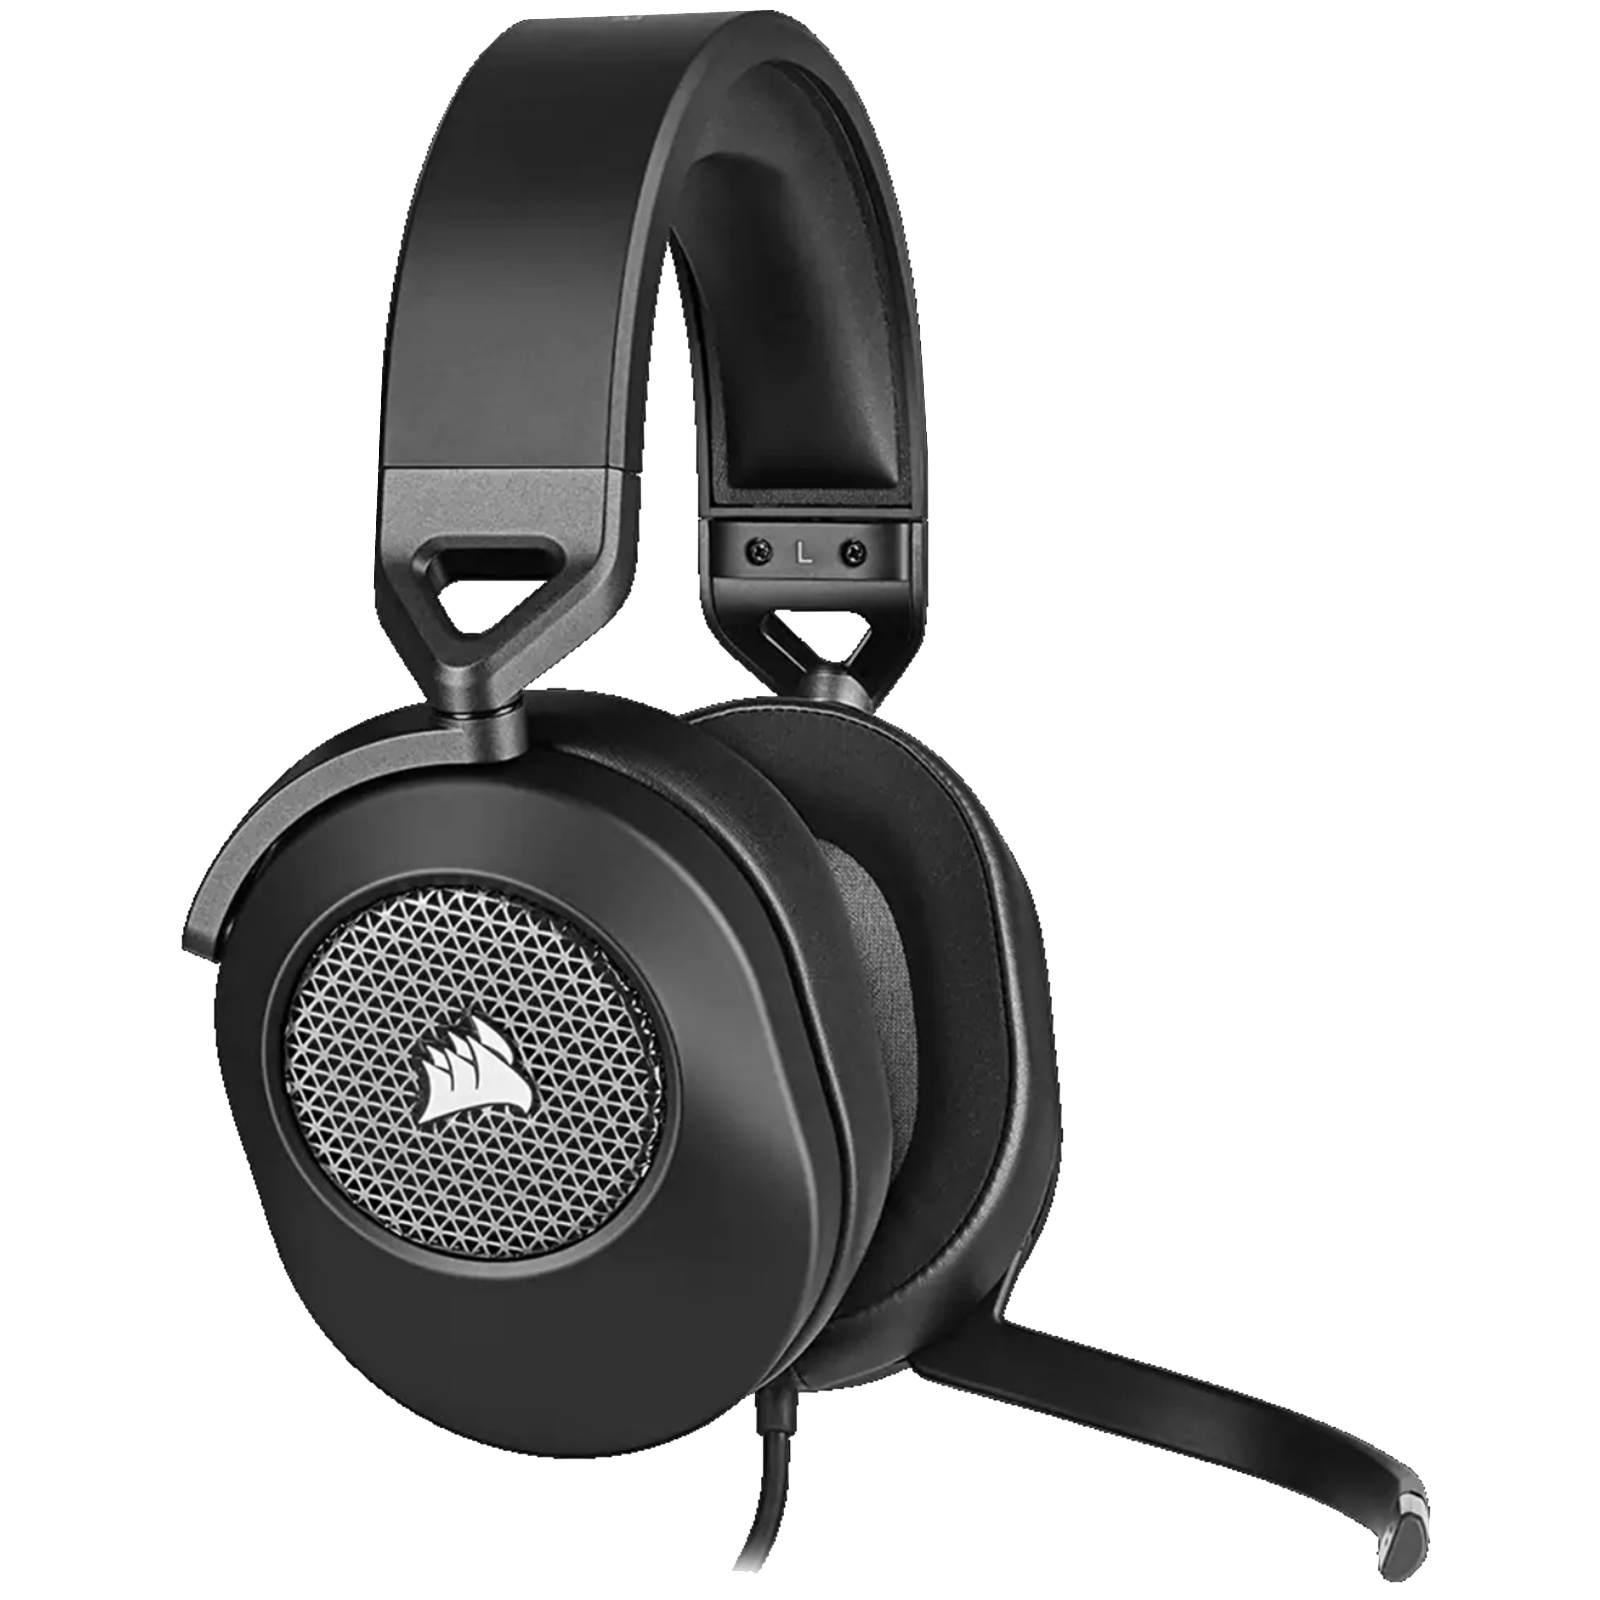 Corsair HS65 7.1 Surround Wired Gaming Headset - Carbon Black